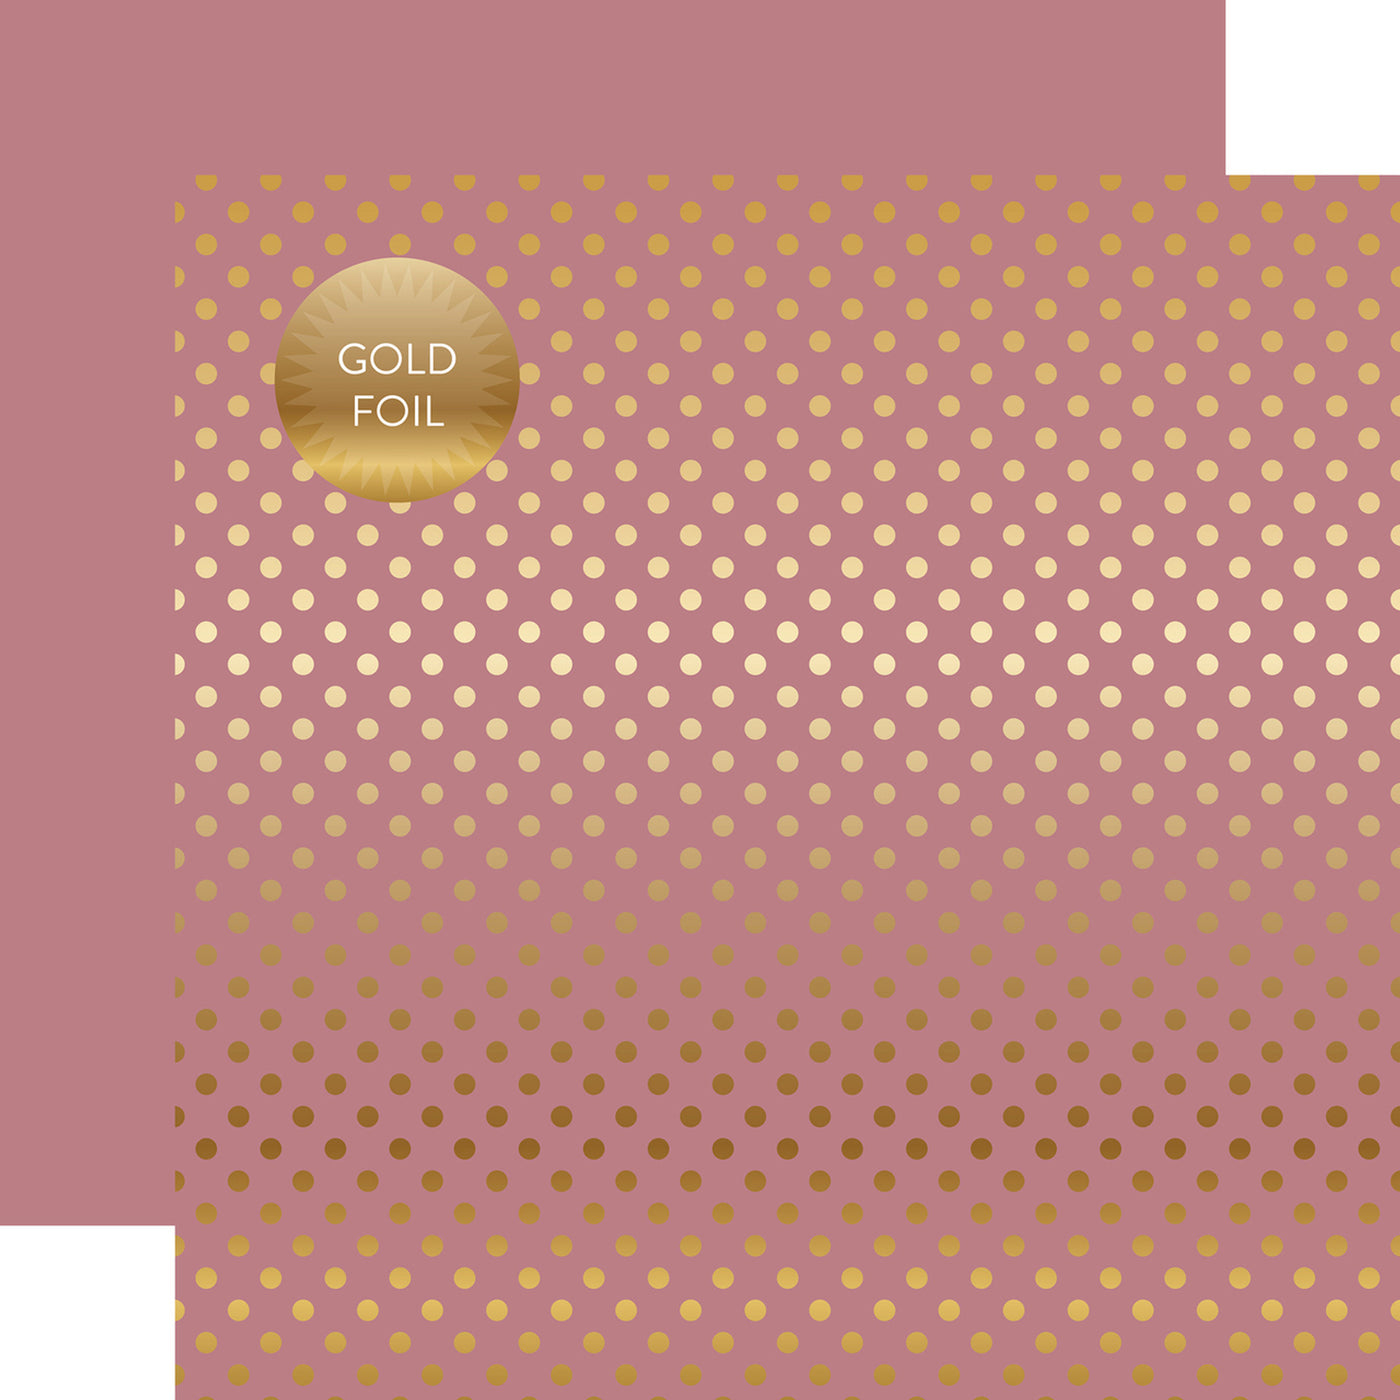 Gold foil dots on mauve pink 12x12 cardstock, plain mauve pink reverse, from Dots & Stripes Collection by Echo Park Paper.